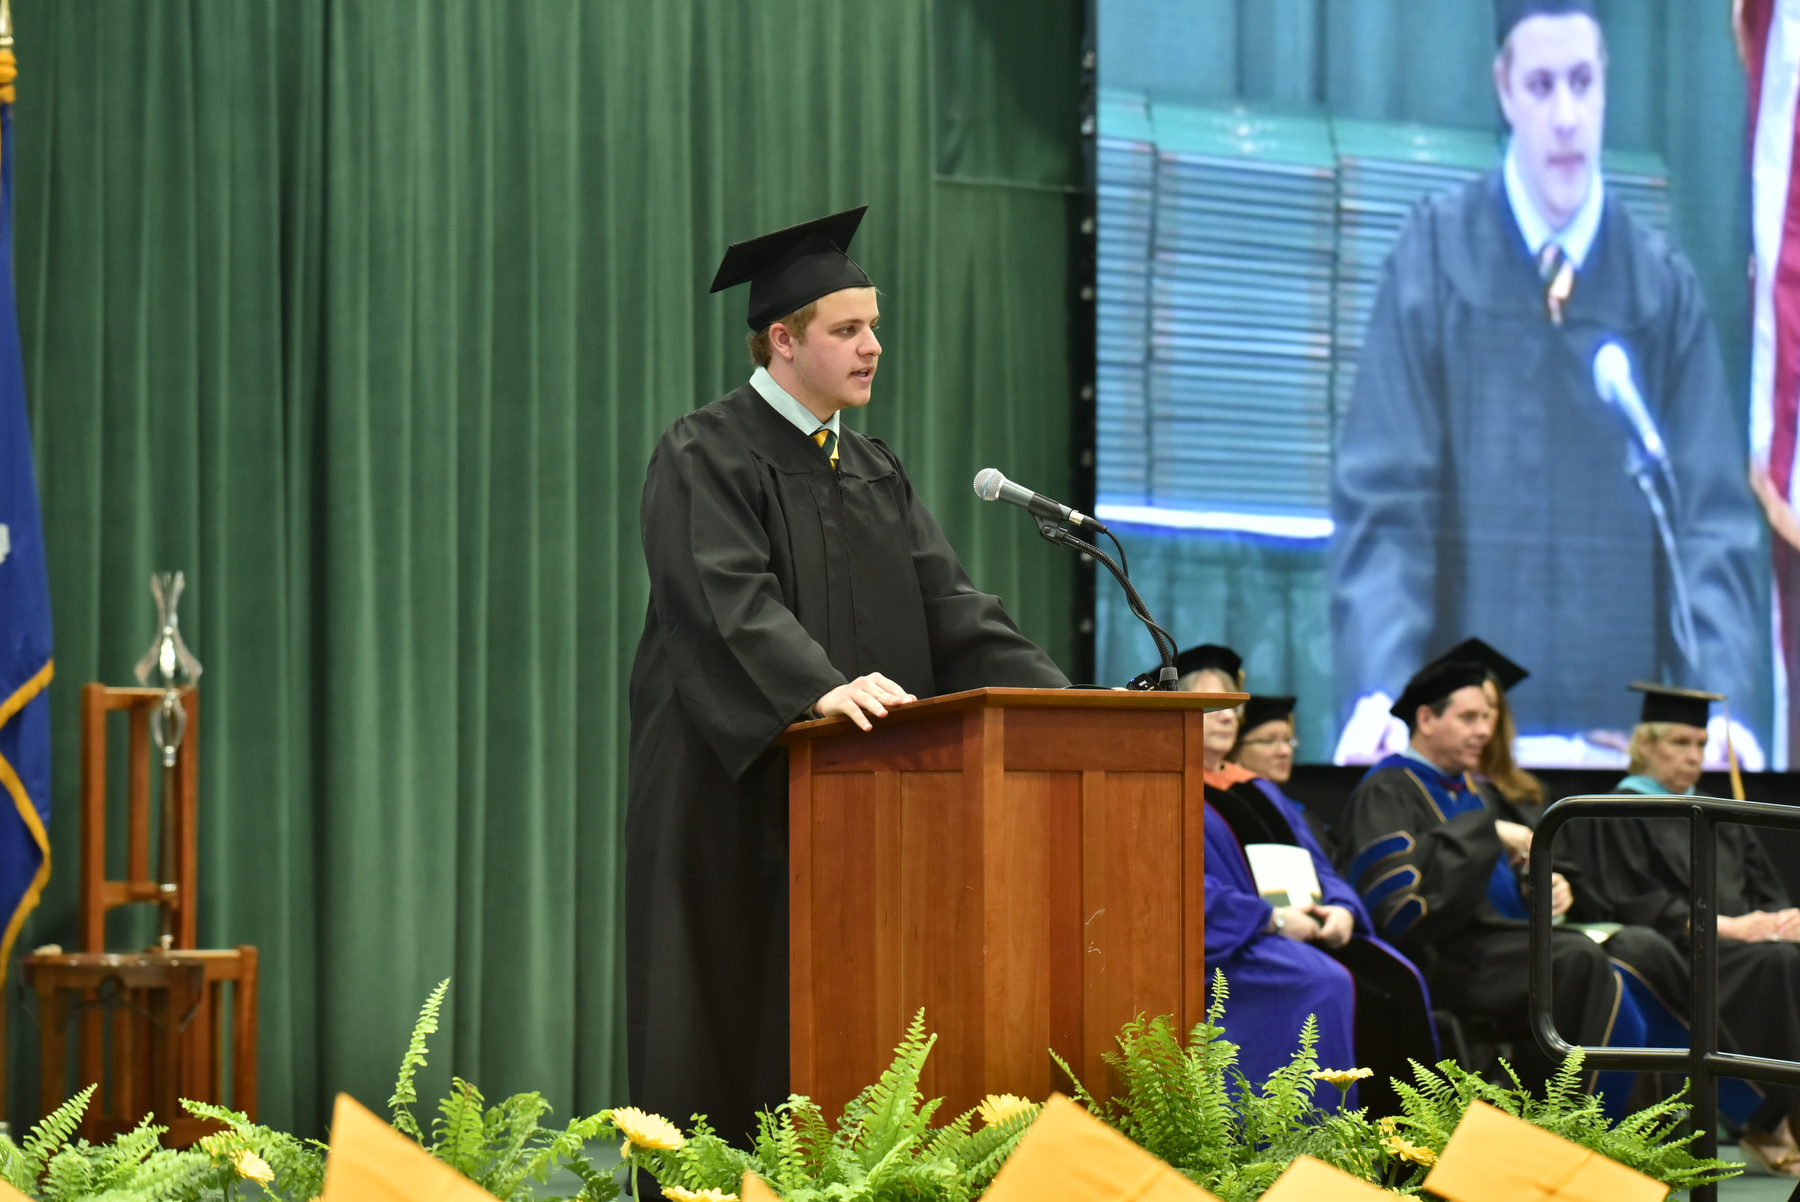 Student Association President Tom Ehrhard gave the student address during the May 13 Commencement ceremonies.